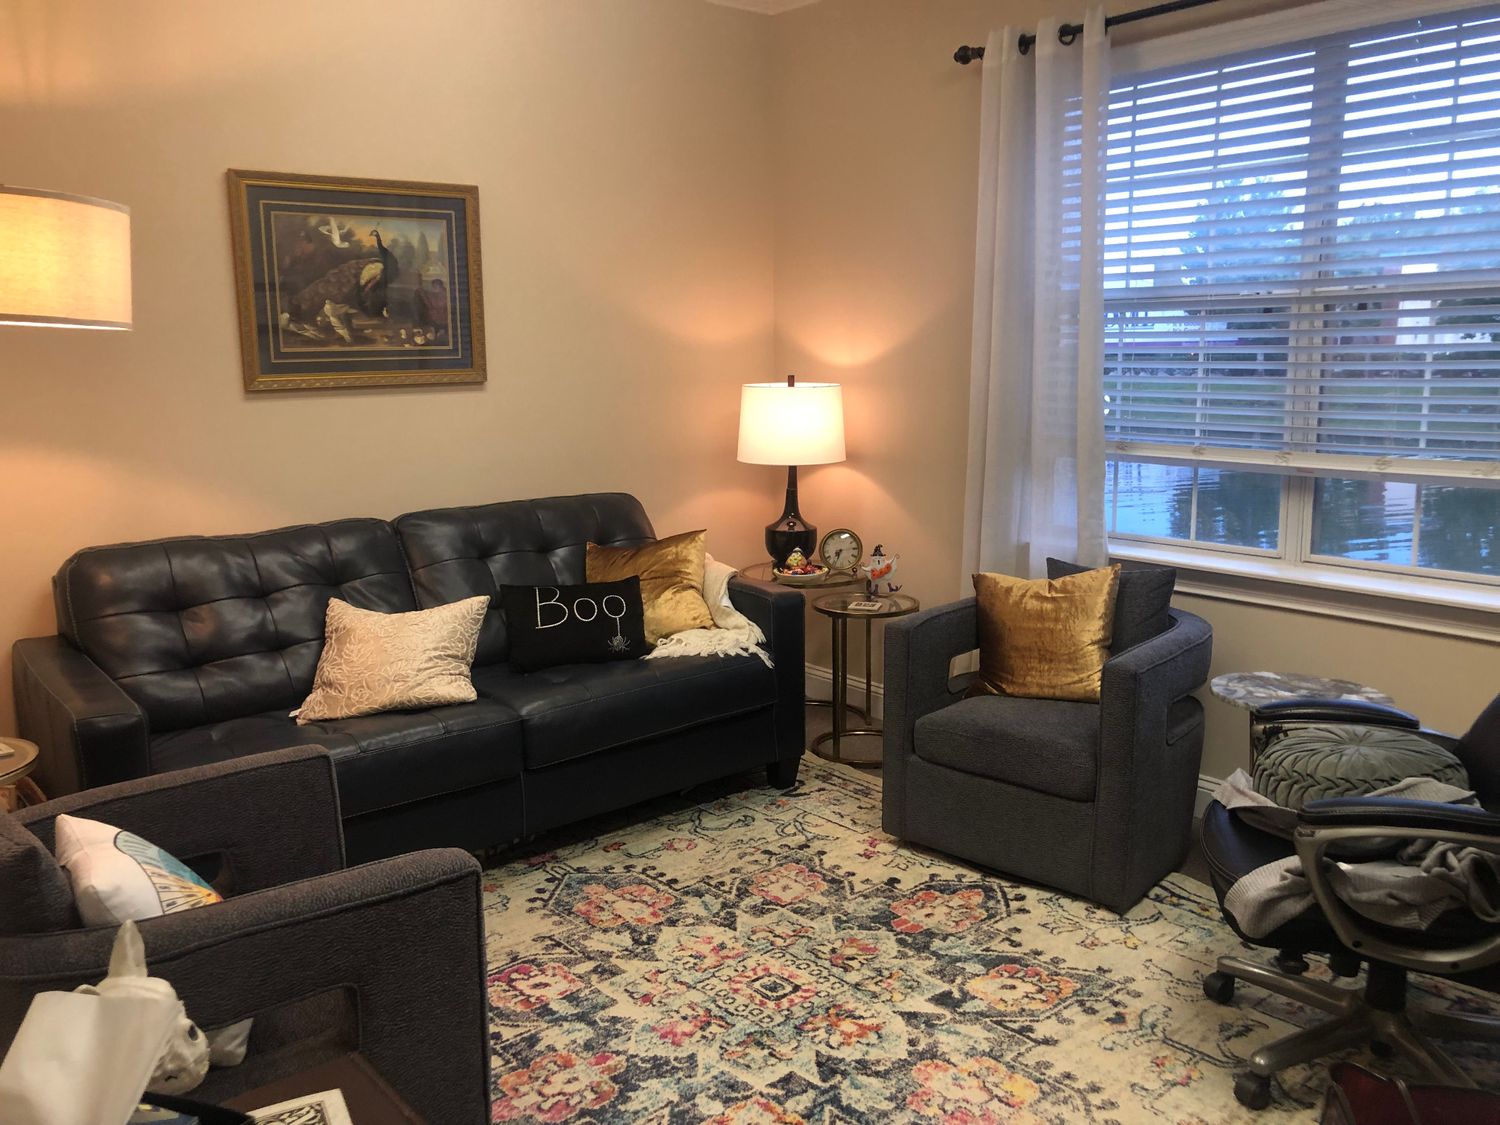 Gallery Photo of Therapist Office